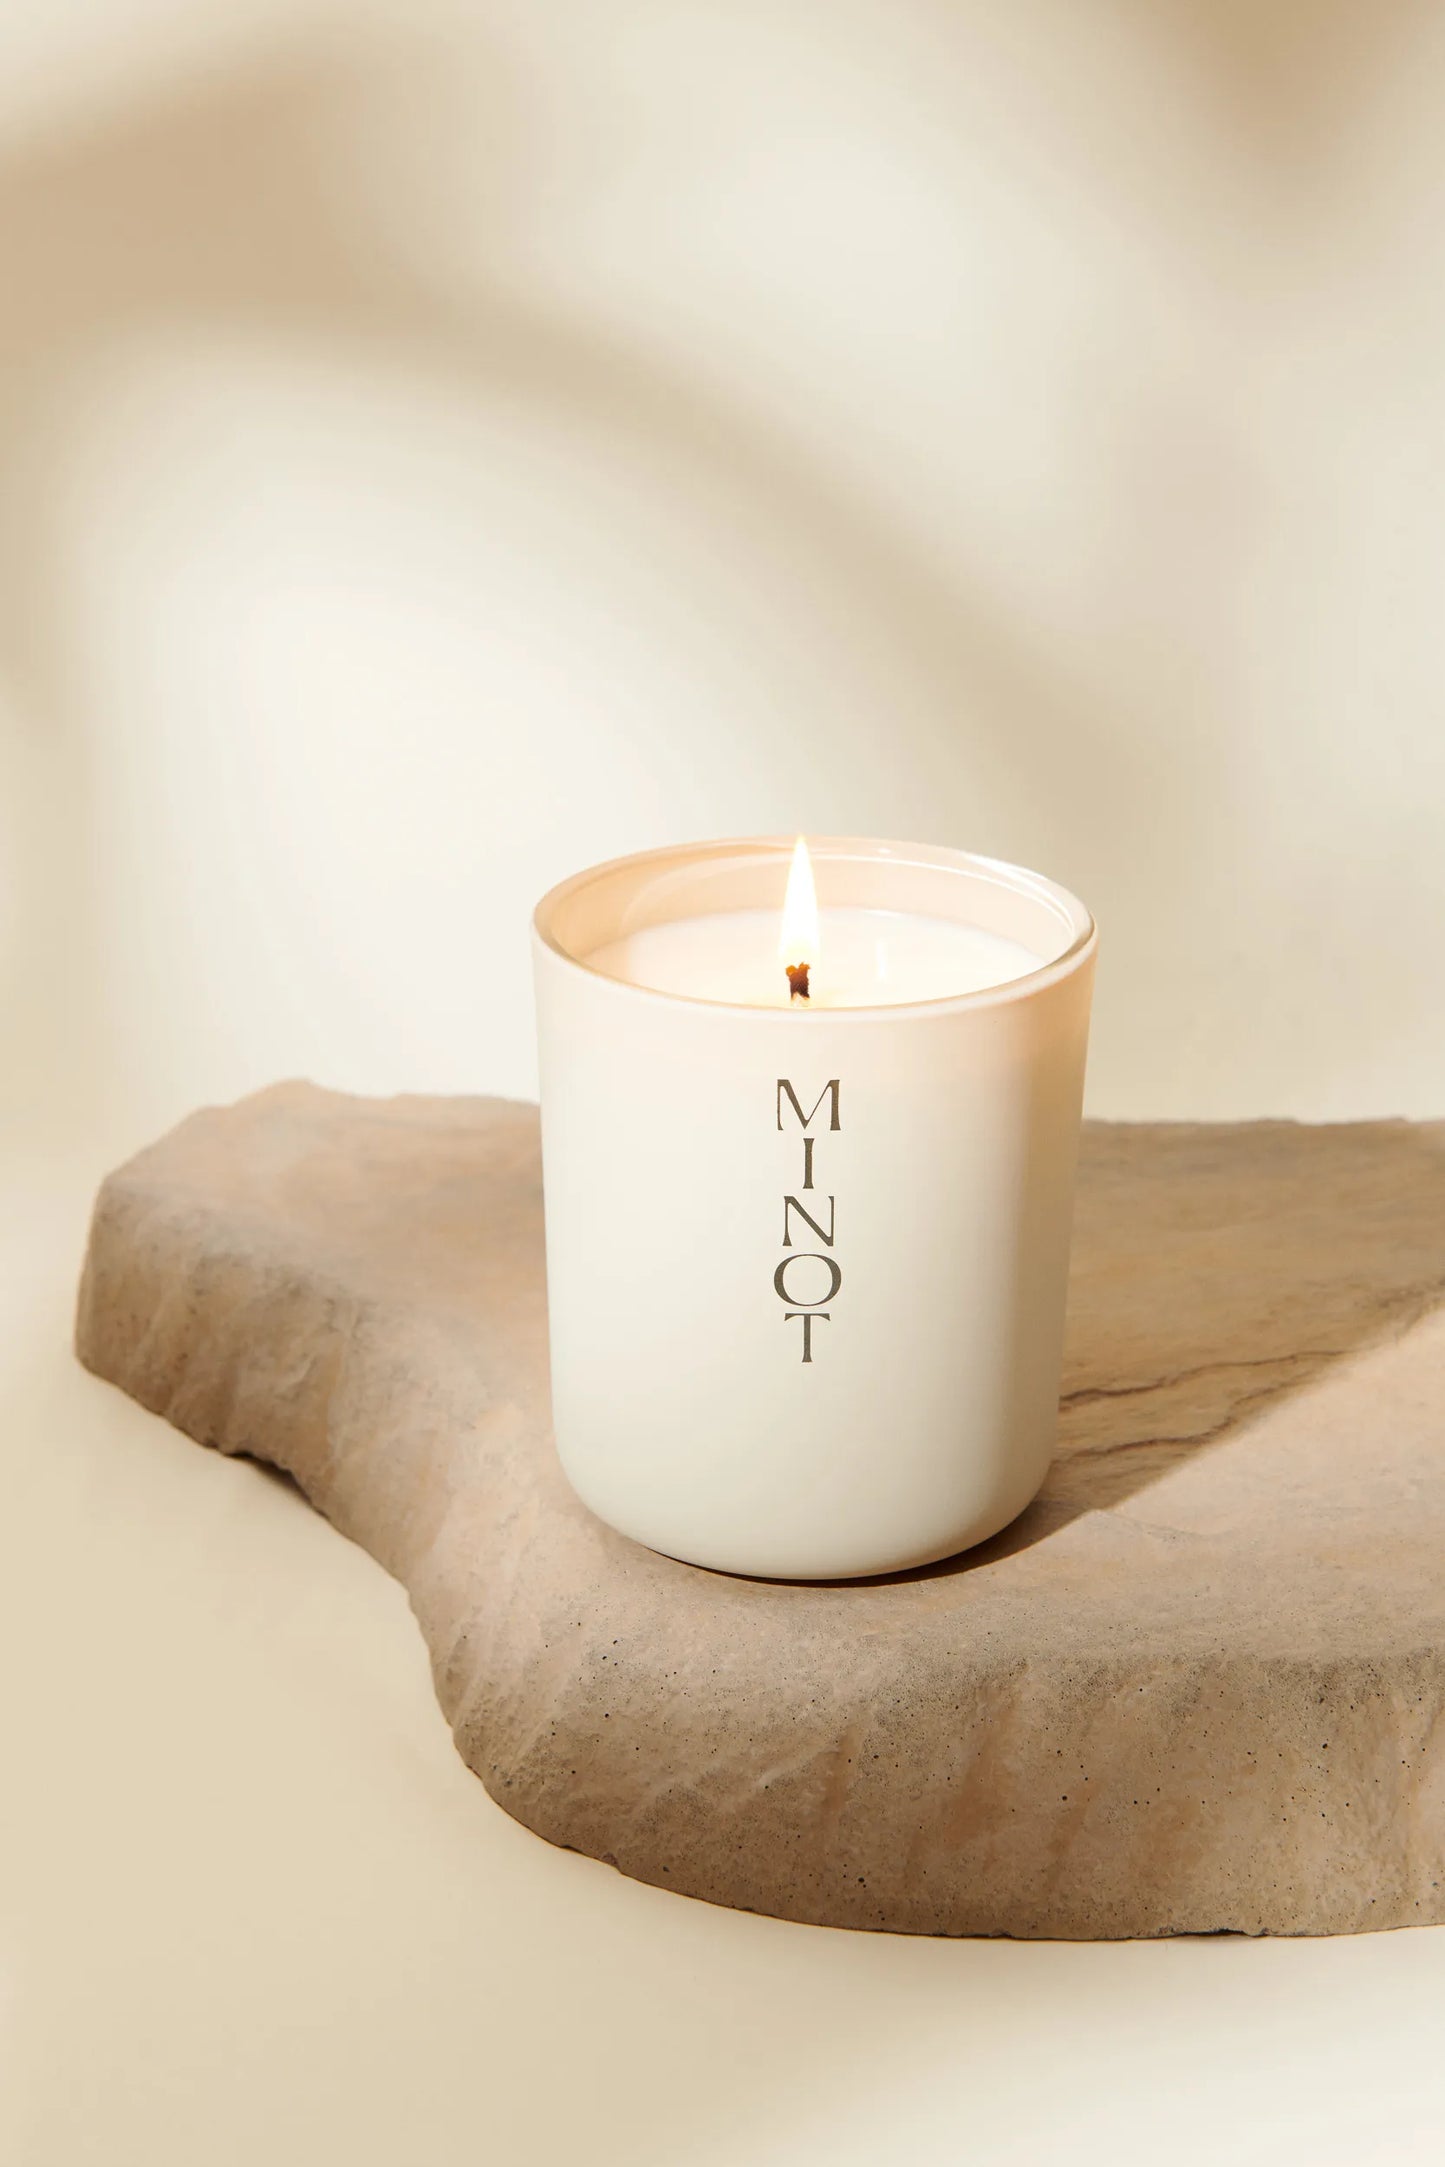 Voyage is a clean-burning soy candle with refreshing notes of coconut, cedar, vetiver, and amyris